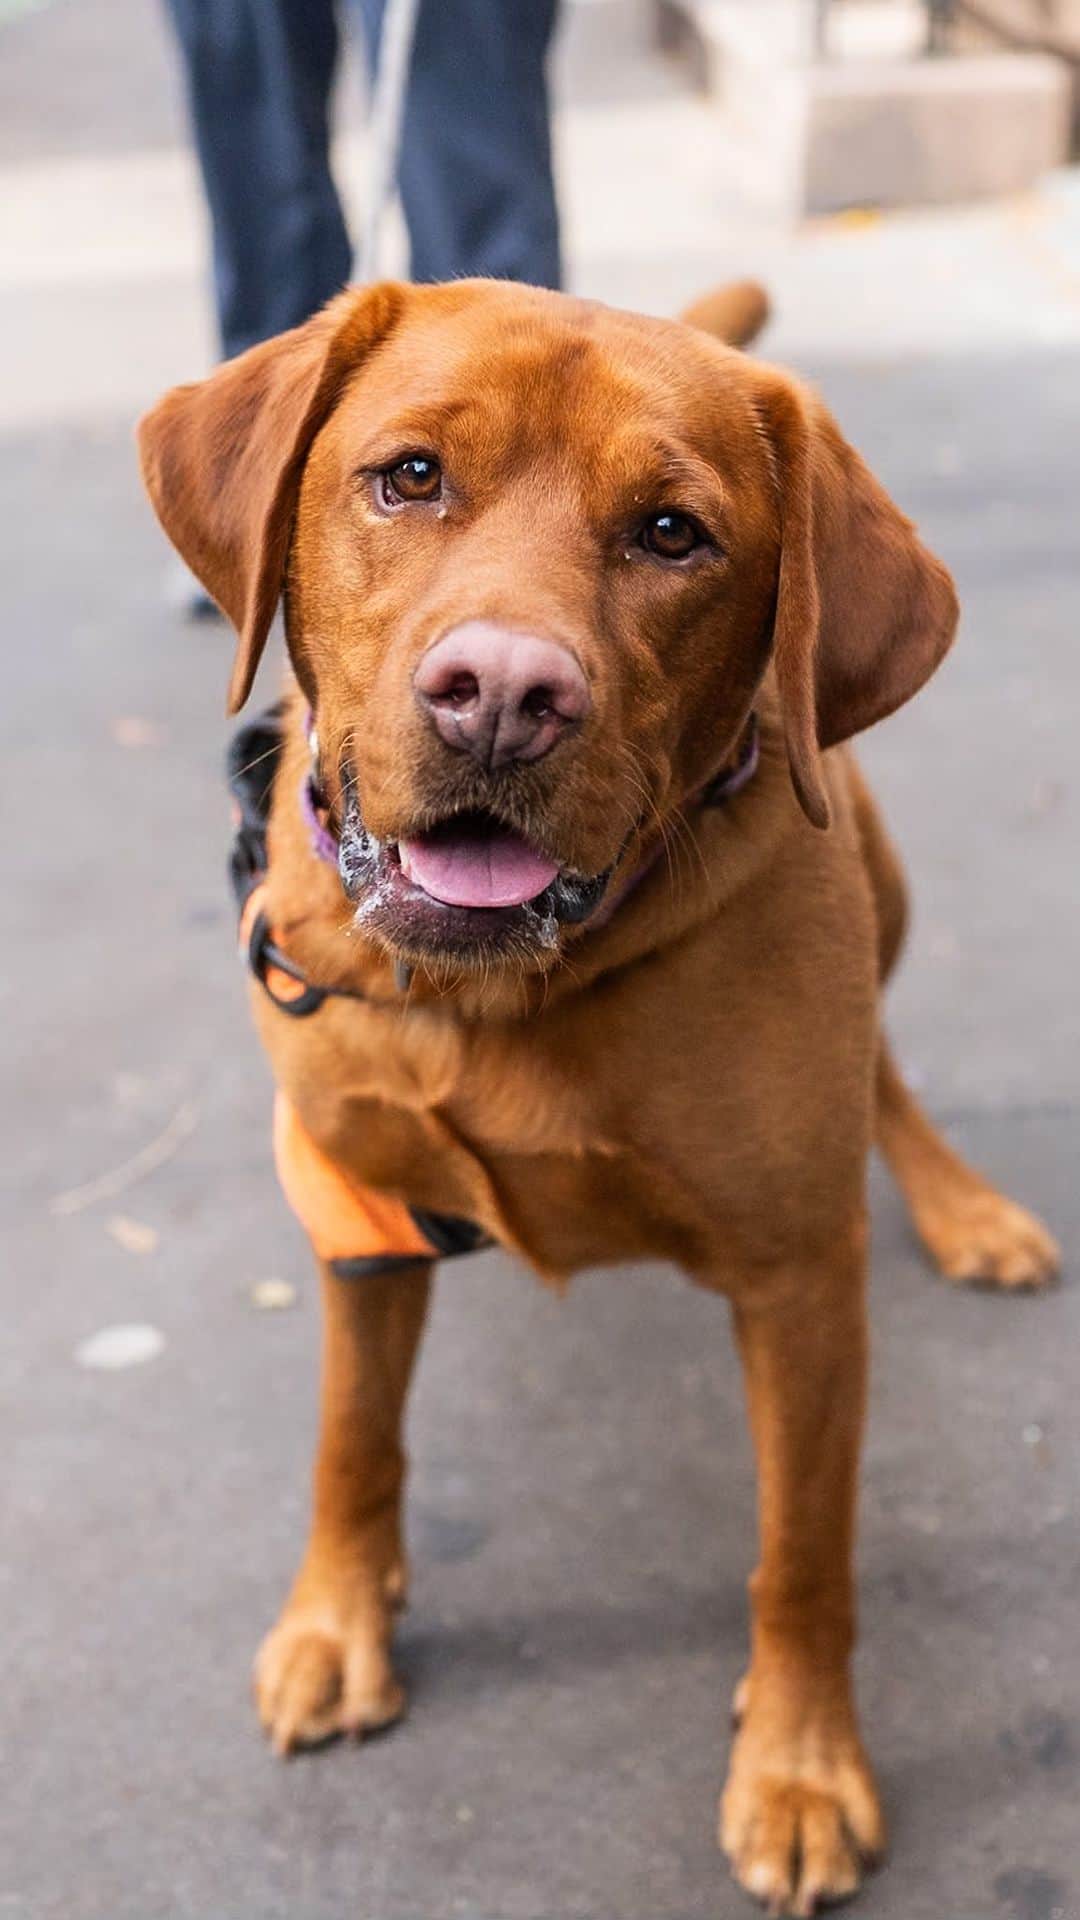 The Dogistのインスタグラム：「Pippi, Labrador Retriever (3 y/o), Prince & Sullivan St., New York, NY • “She’s named after Pippi Longstocking. She’ll grab food off your plate. Everything’s a joke with her – everything’s funny, everything’s sweet. She’s just so loving and wonderful – she’s been a great addition to our family. Her favorite toy is any ball or slipper. She doesn’t chew on the slippers or ruin them, she just borrows them. I love the extra energy she brings to the household – it’s impossible to be negative around her.”」